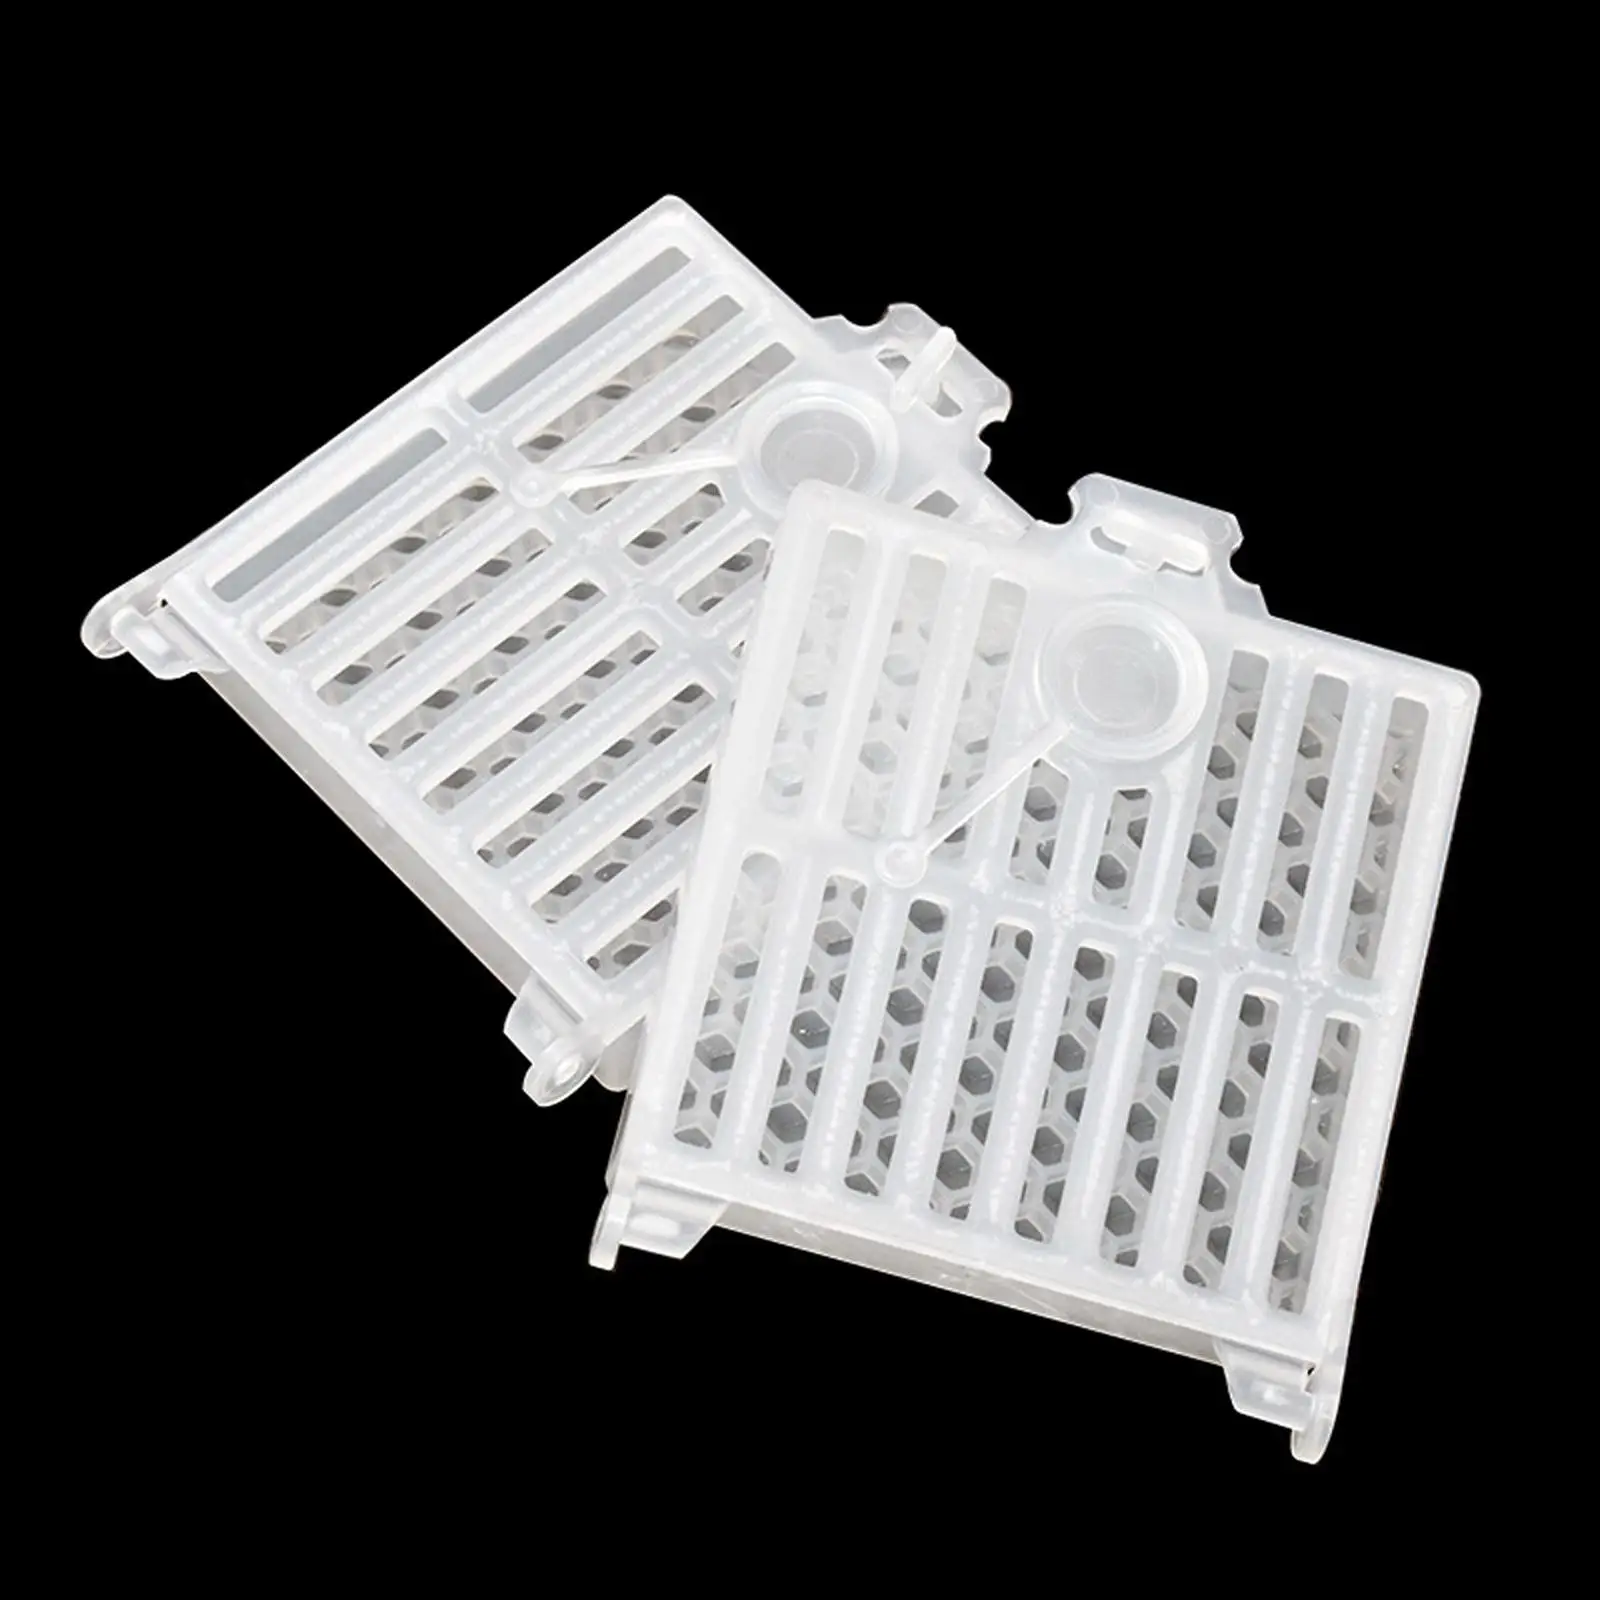 5 Pieces Queen Bee Post Cage Clip ABS Move Transmit Beekeeping Supplies Box